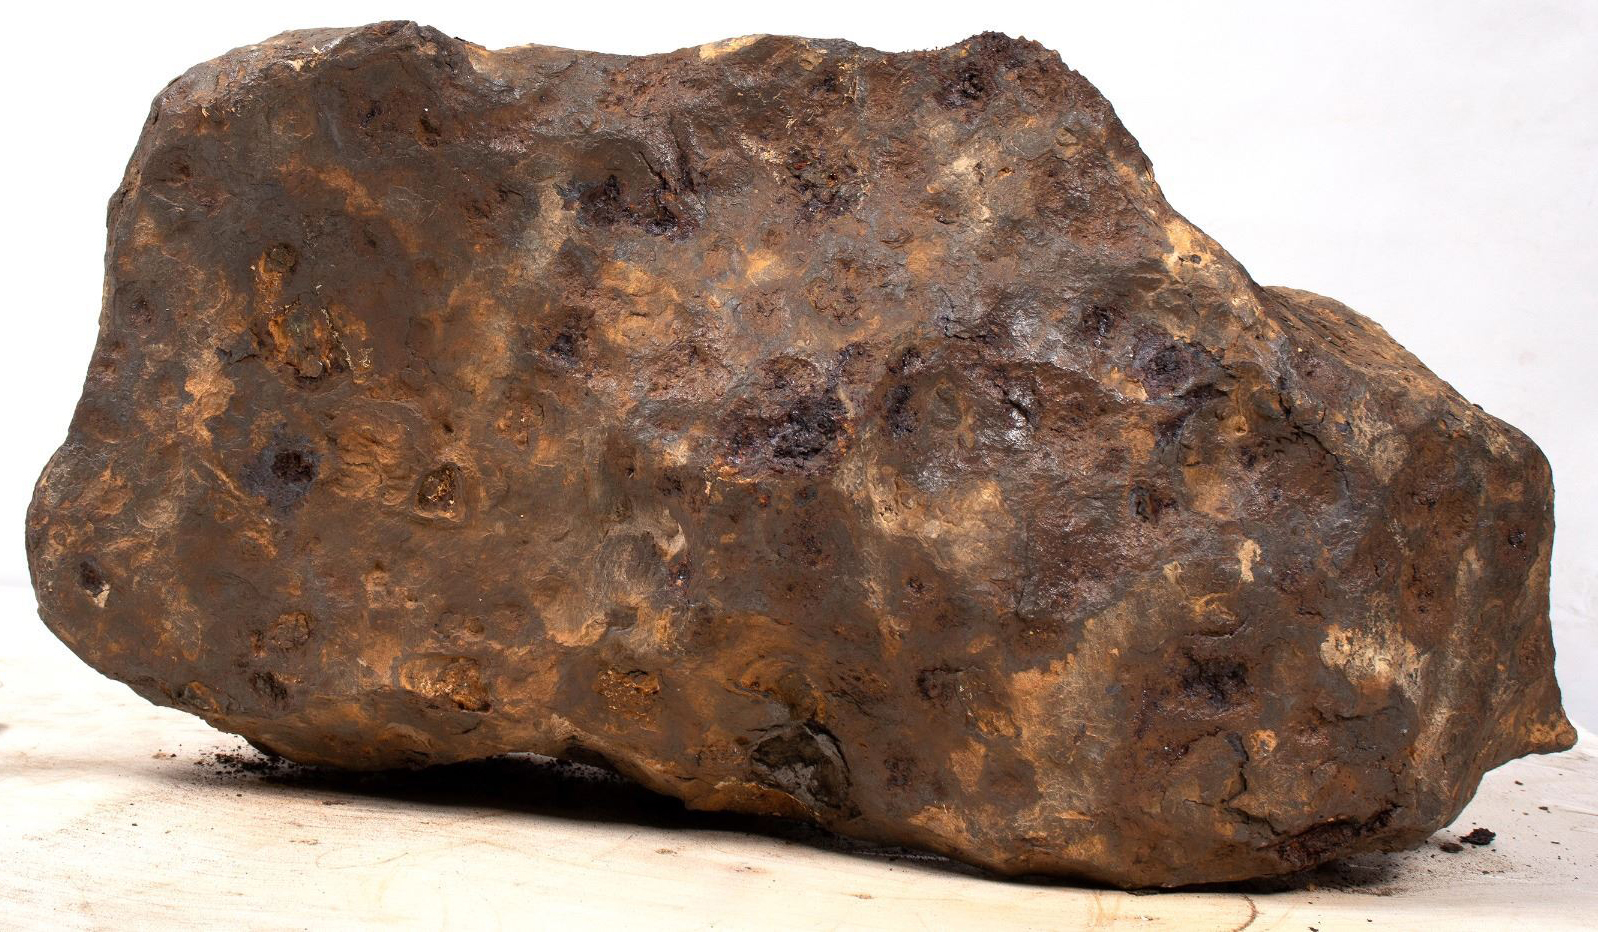 Iron-nickel meteorite found in China in 1958 and believed to have fallen to Earth in 1516, $4,125